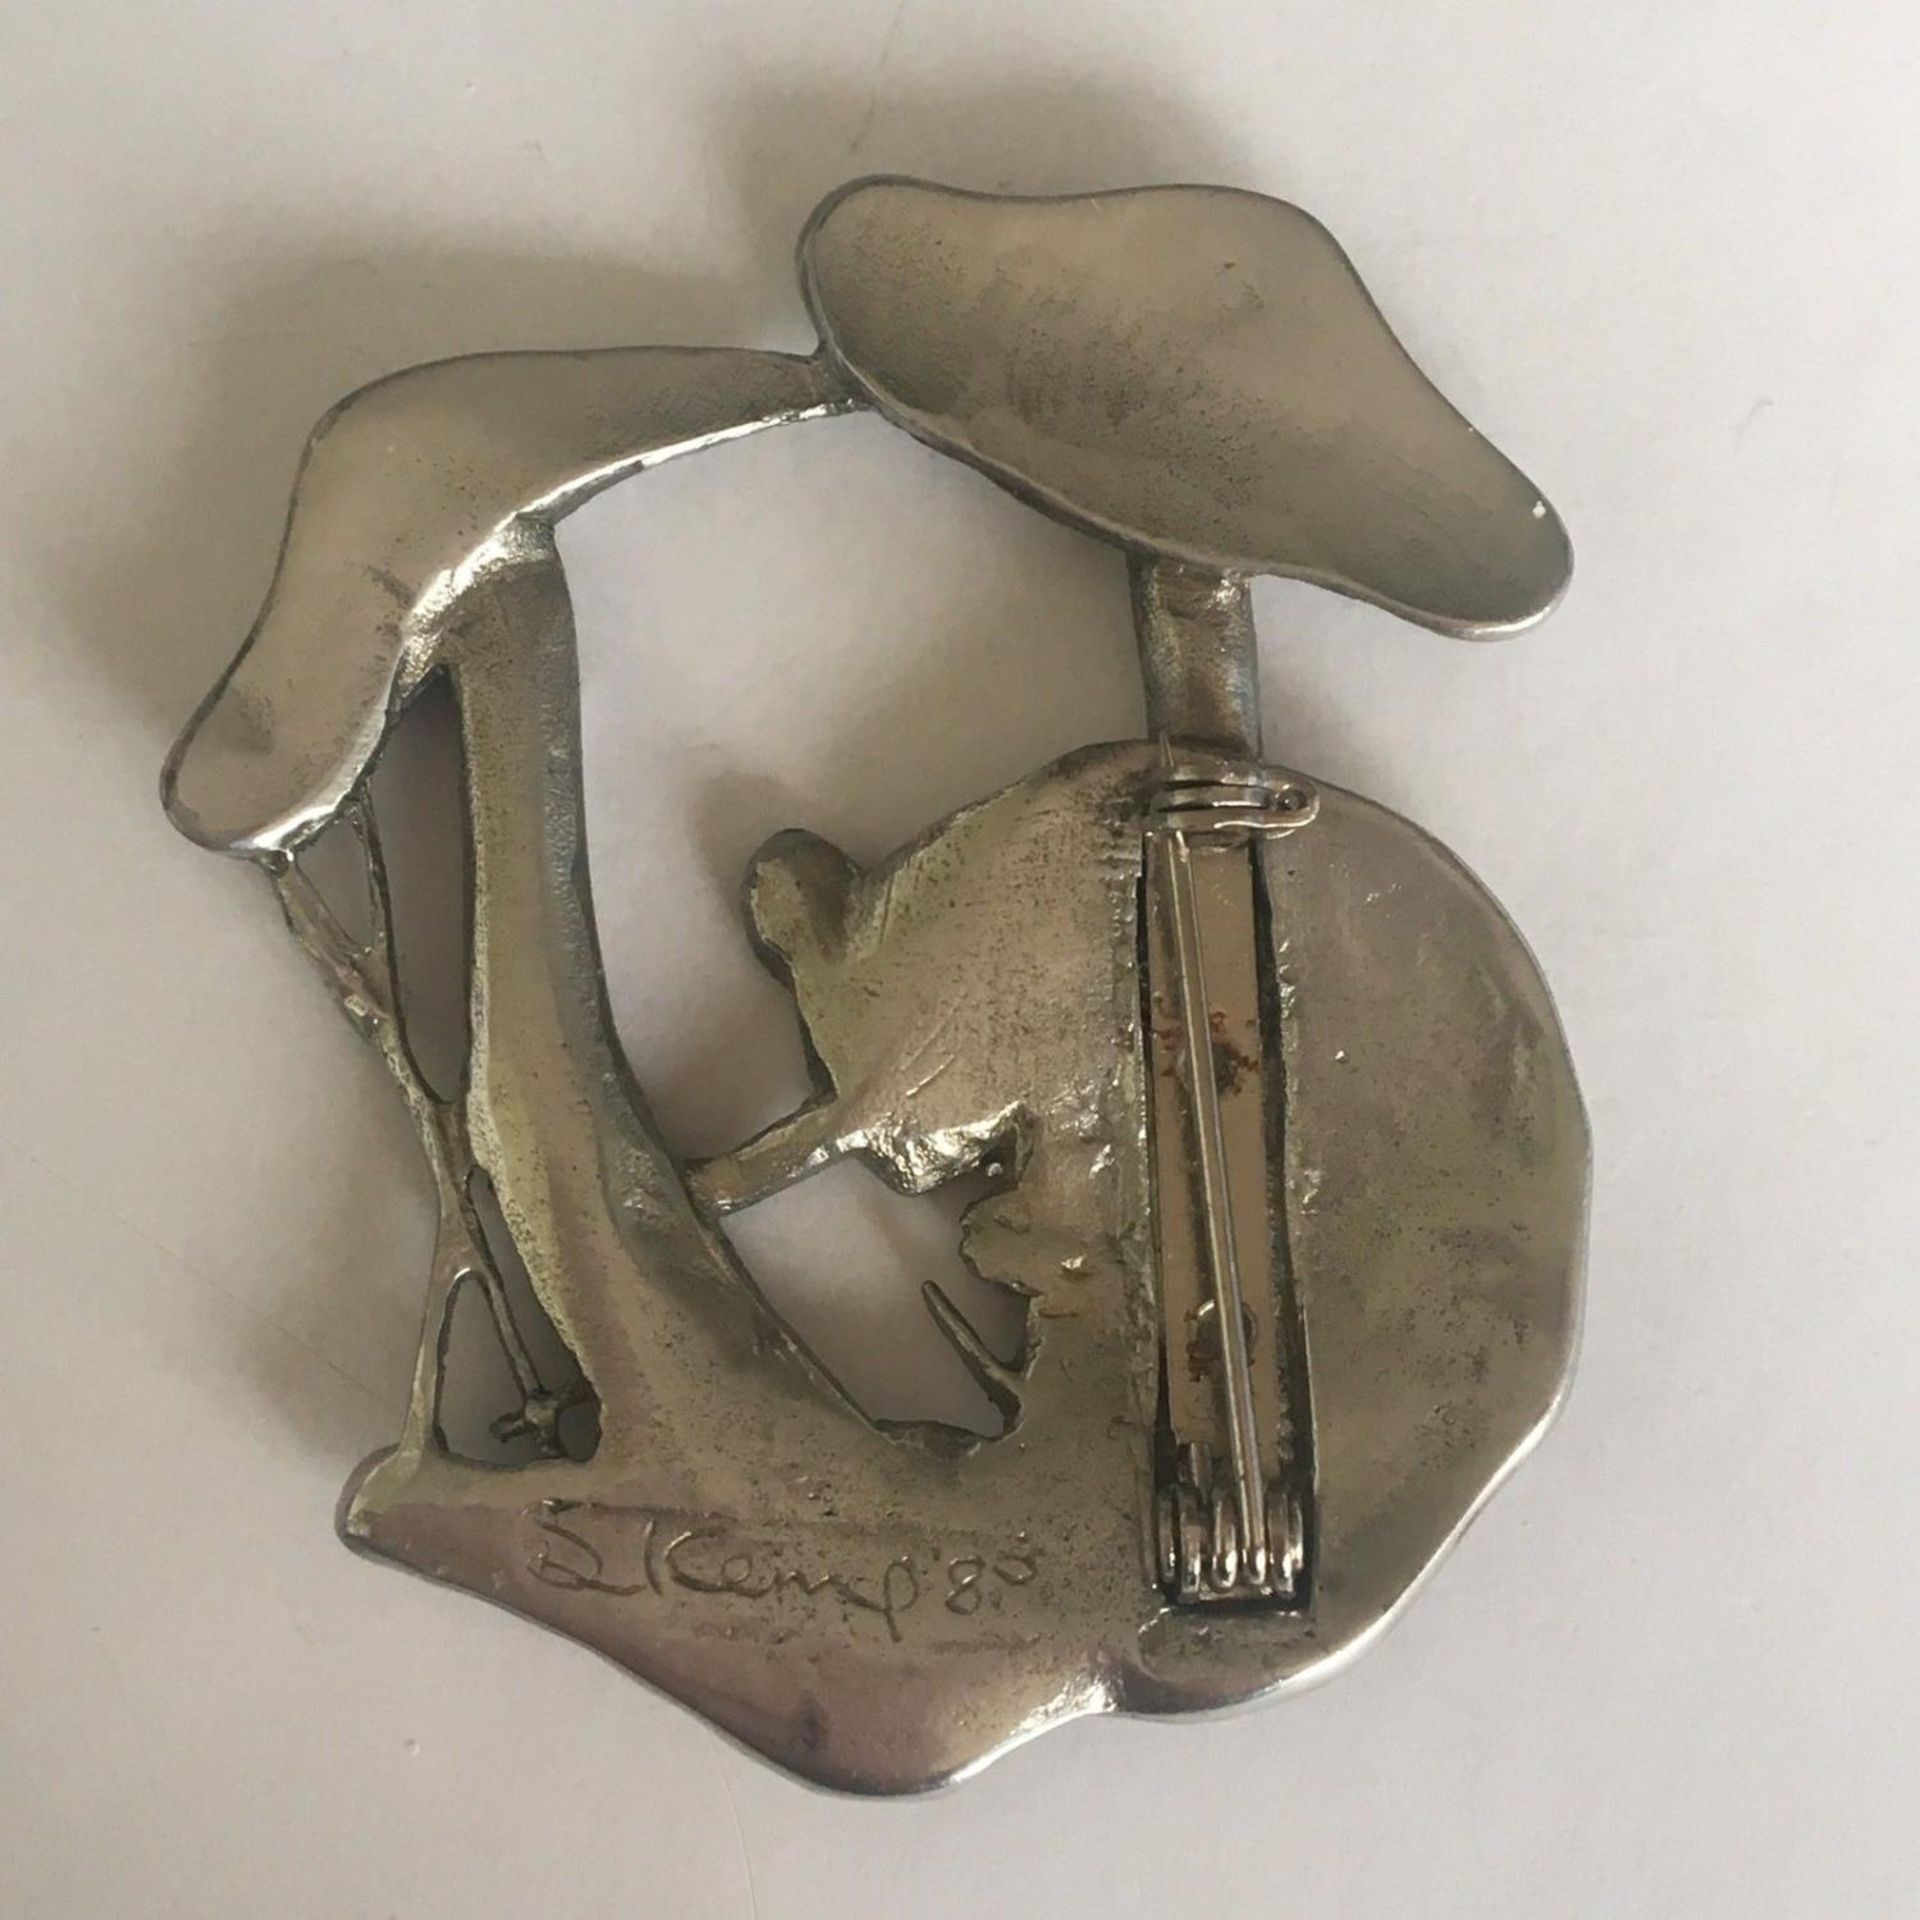 Pewter brooch by British Artist David Kemp, Field Mouse Toadstools Signed D Kemp - Image 2 of 2